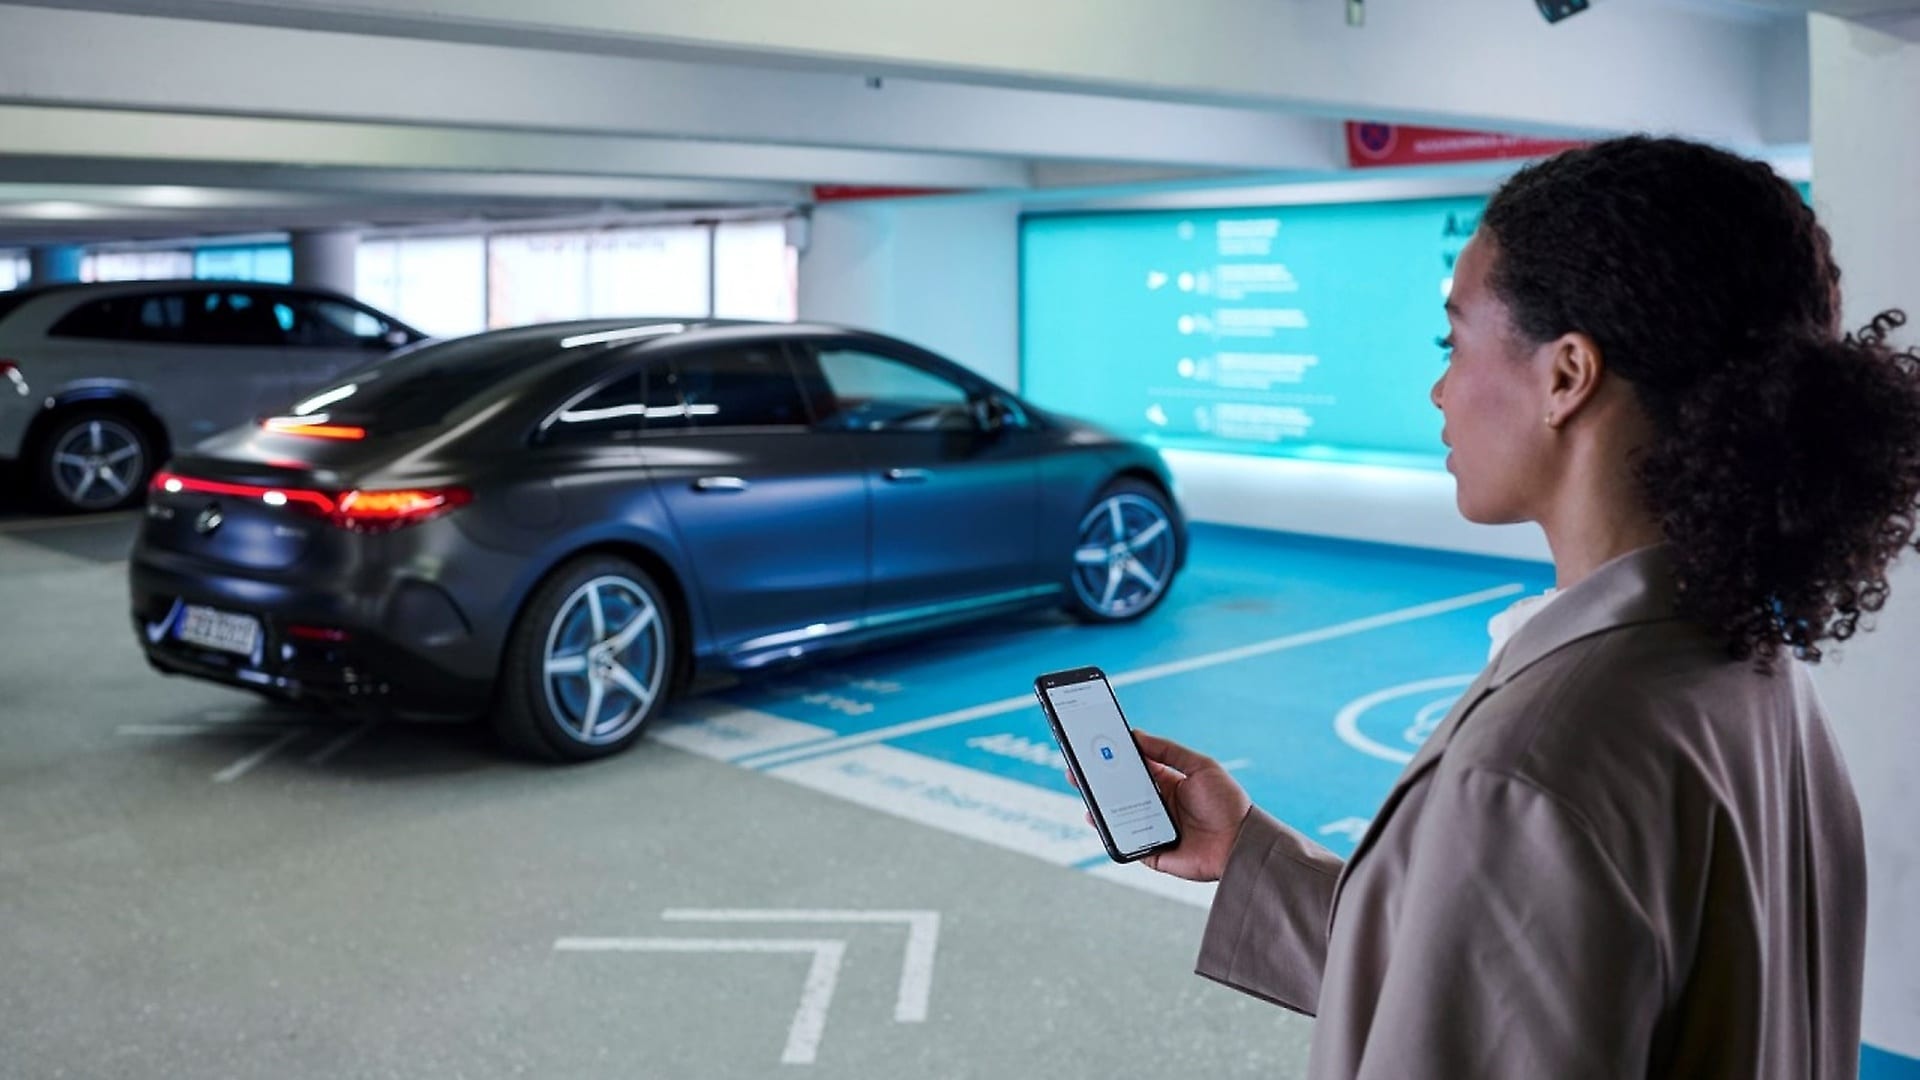 Seven Mercedes-Benz models are equipped with the INTELLIGENT PARK PILOT and ready for highly automated and driverless parking.